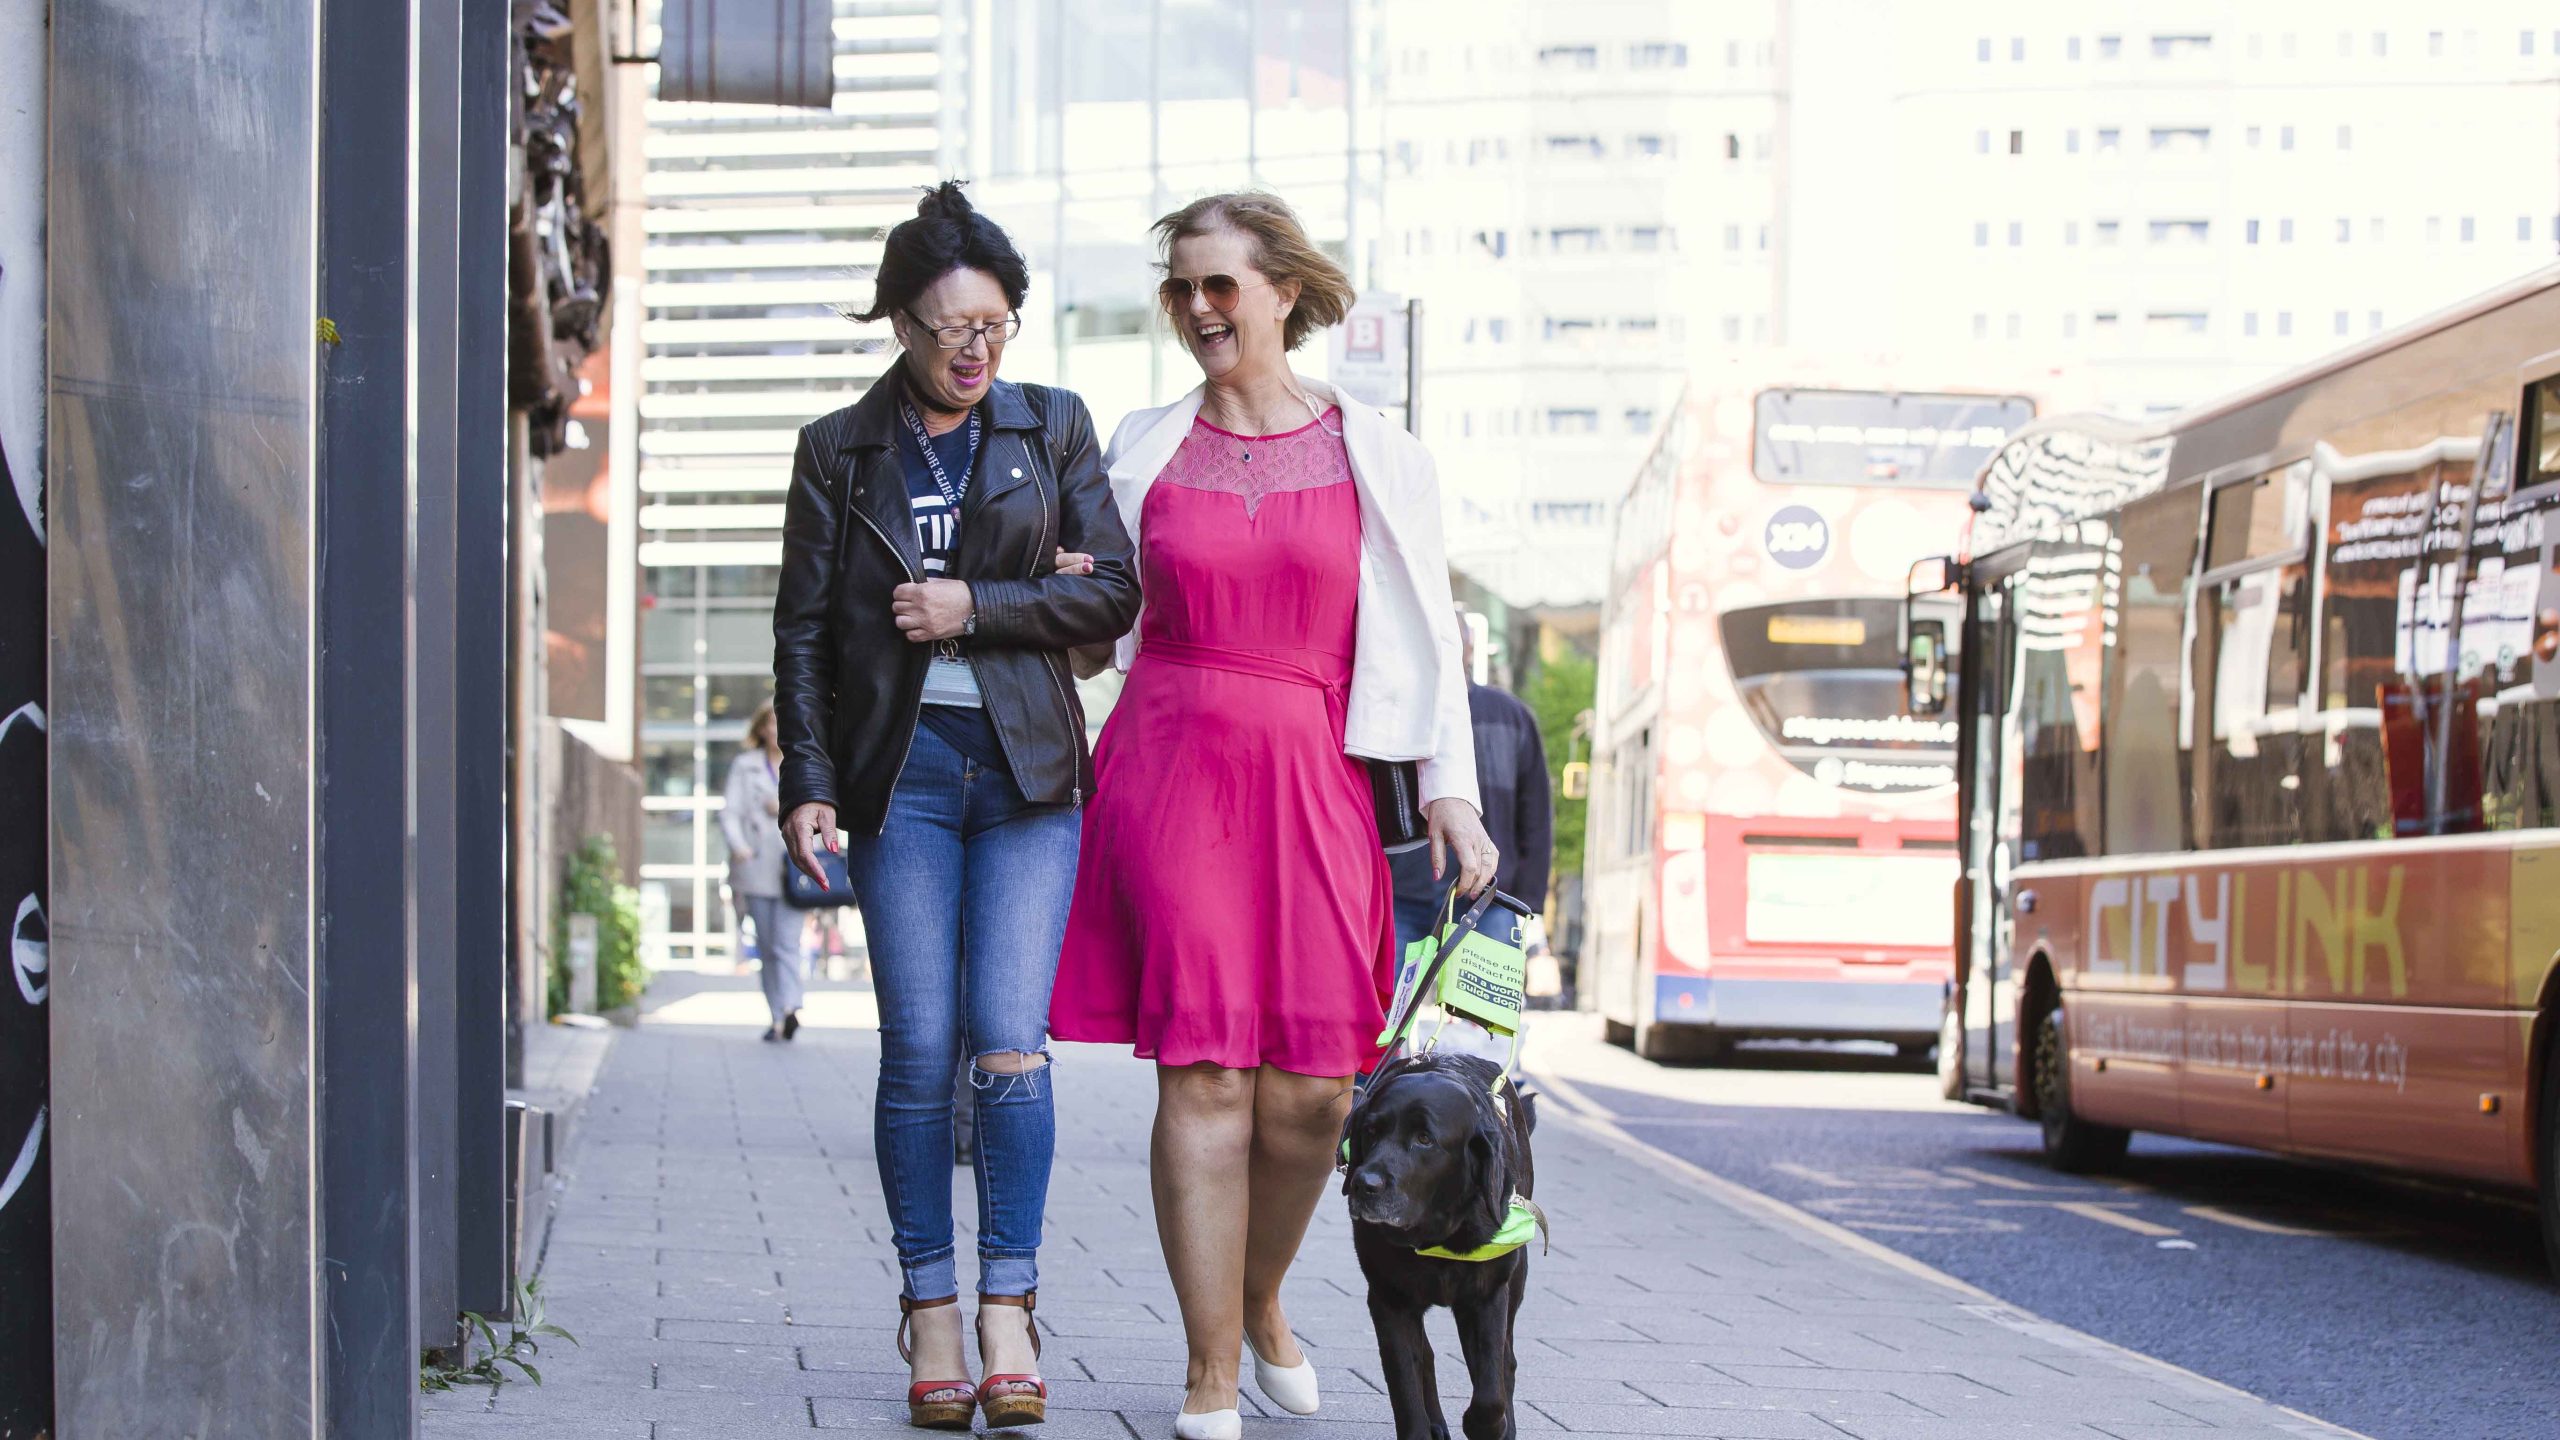 Two women walking along the street. One is wearing a pink dress and white cardigan and is holding a guide dog hardness (the dog is walking to her side). The other woman is wearing jeans and a leather jacket.